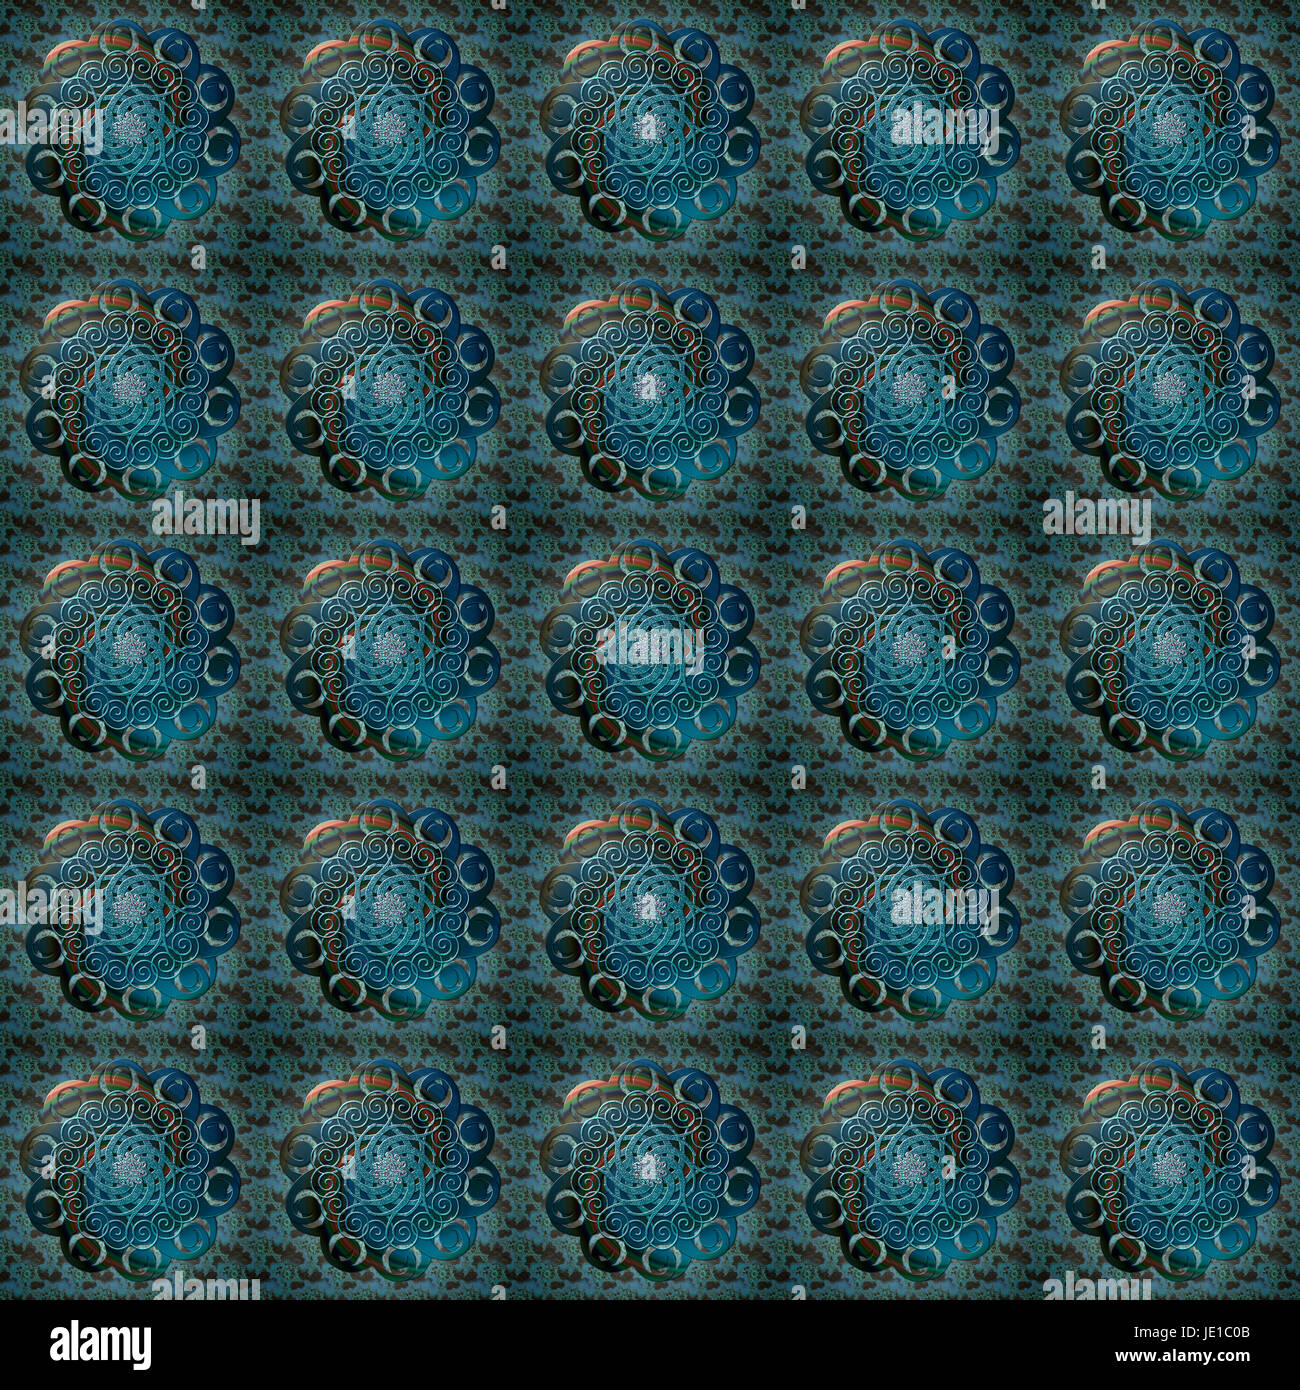 Turquoise Flower Whirl Seamless Pattern Stock Photo